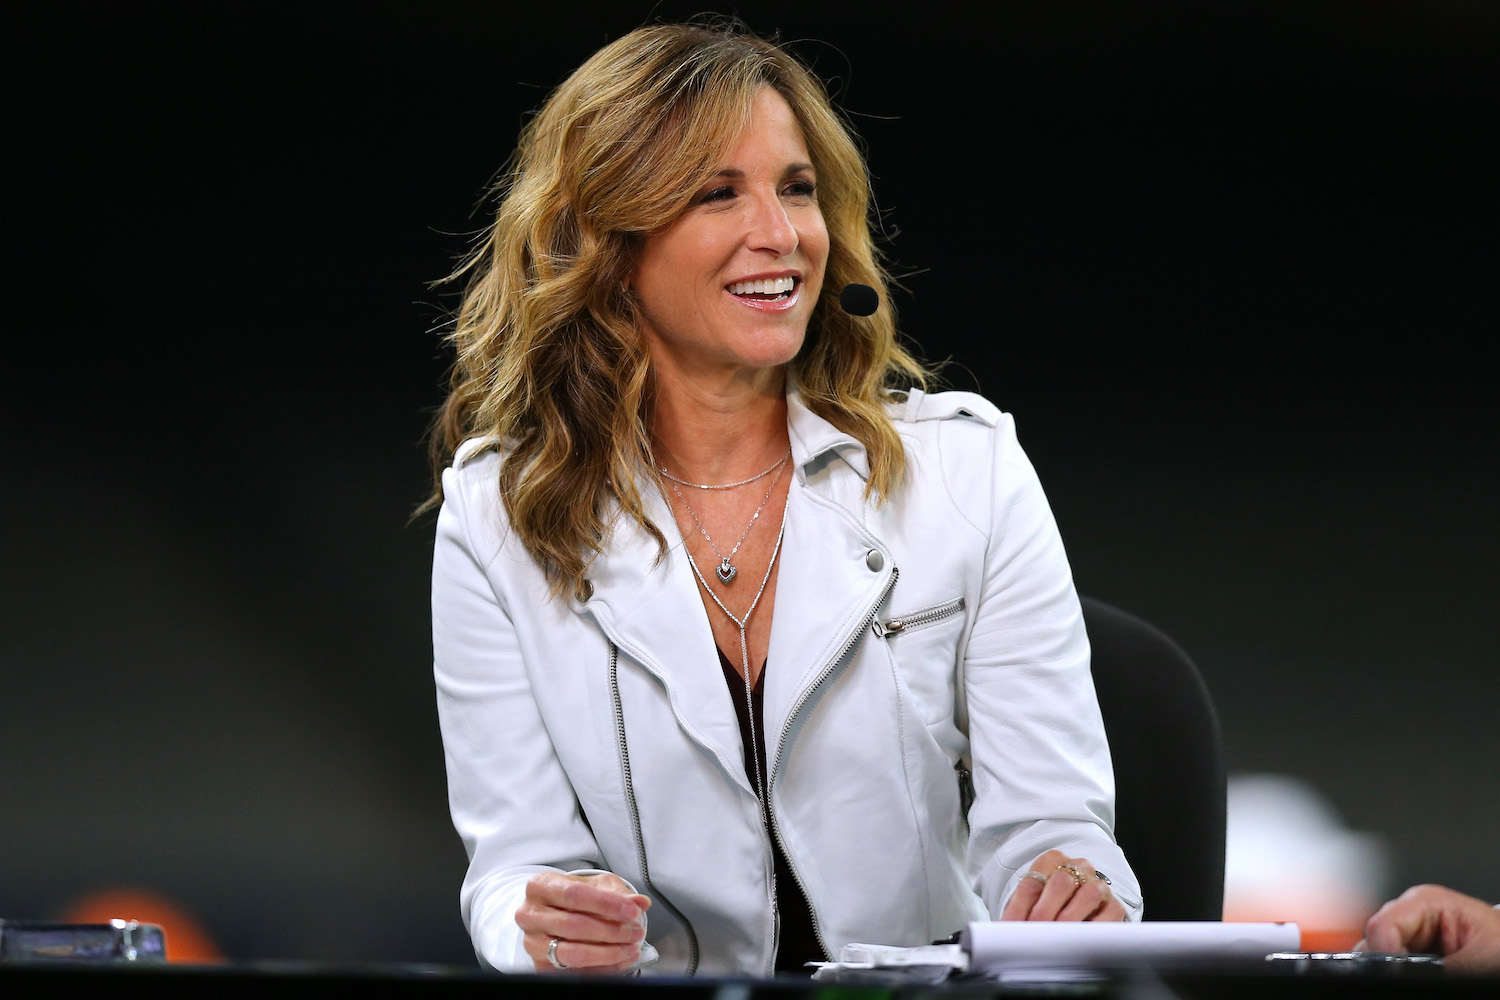 Suzy Kolber Husband, Gay, Age, height, Net worth and Ethnicity